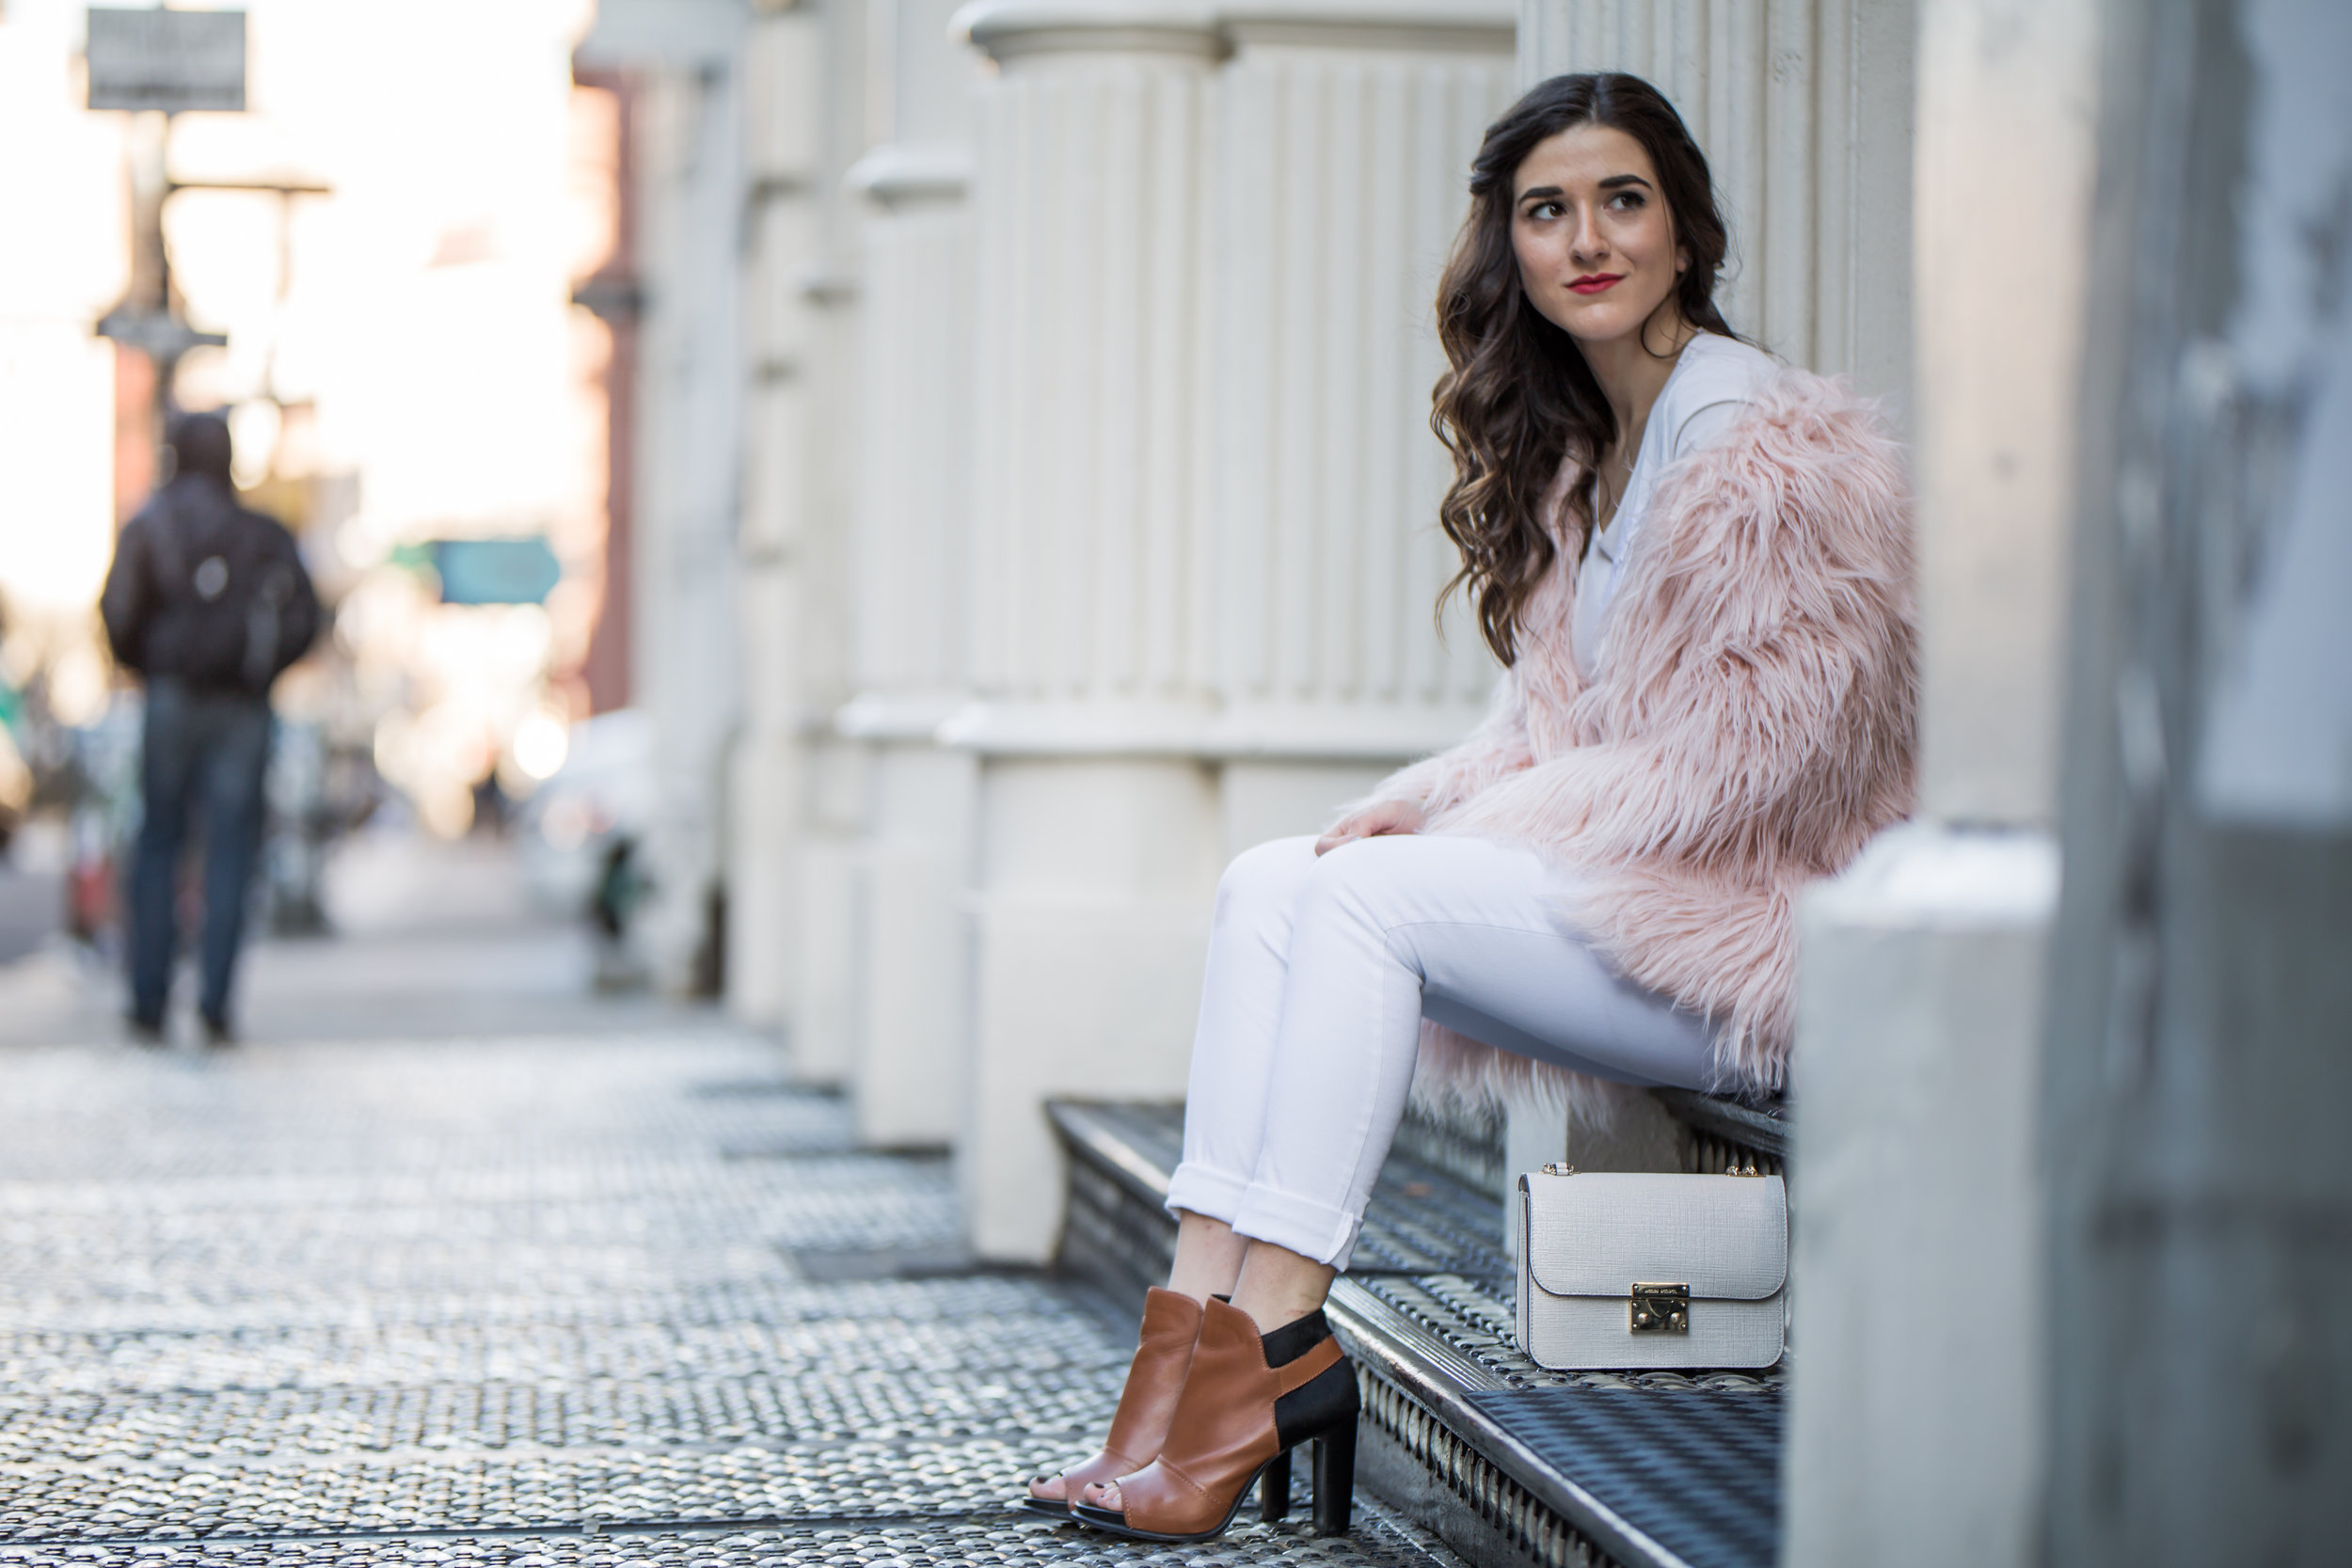 Pink Faux Fur Jacket White Jeans The Best Career Advice Esther Santer Fashion Blog NYC Street Style Blogger Outfit OOTD Trendy Winter Whites Henri Bendel Bag Tan Booties Girl Women Shop Sale Hair Model Shoes What To Wear Wearing Accessories Photoshoot.jpg